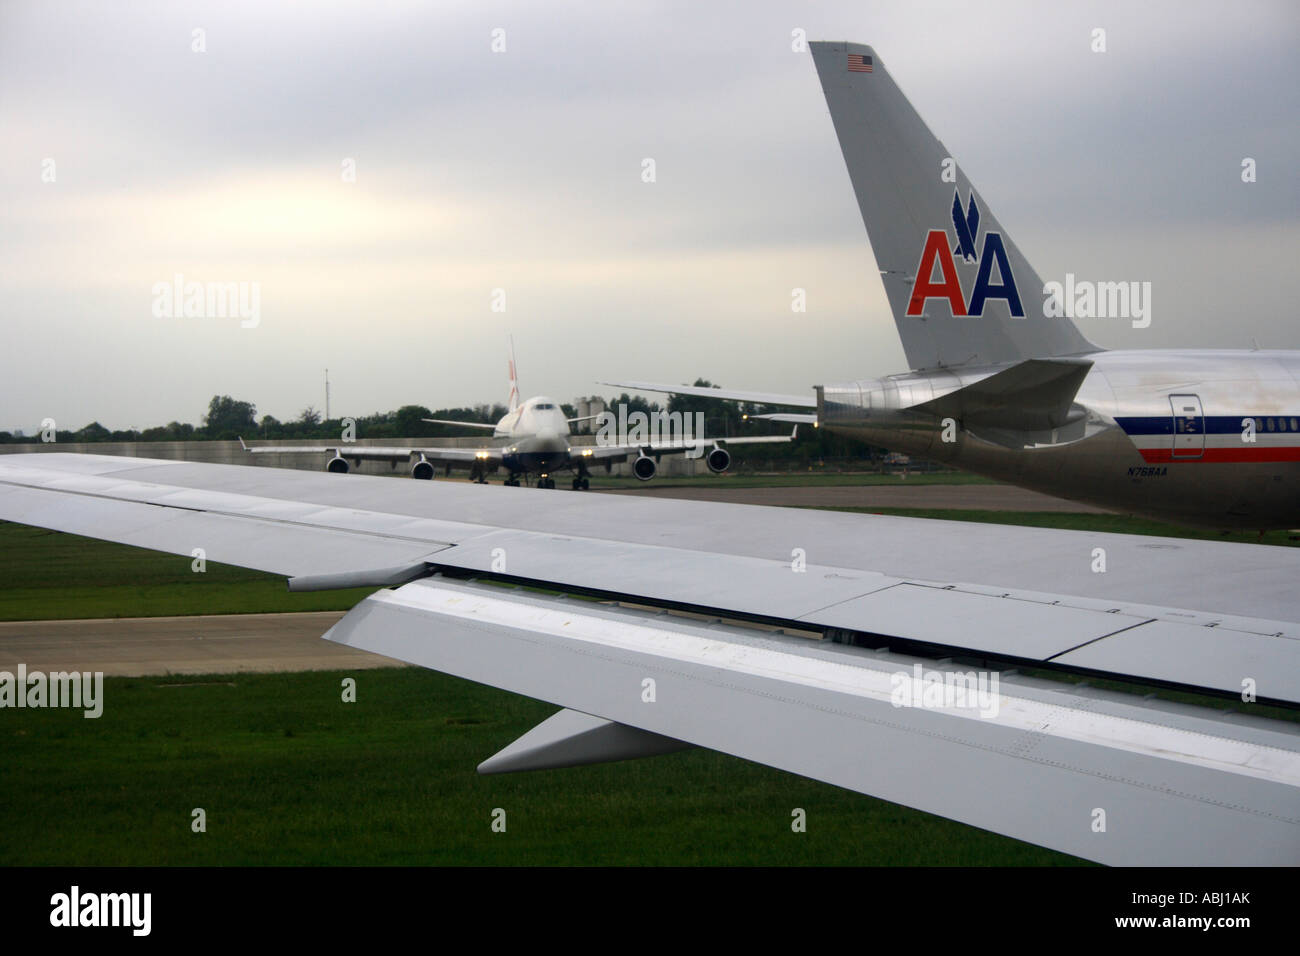 London Heathrow airport, planes waiting for take off,  Great Britain, Europe. Photo by Willy Matheisl Stock Photo